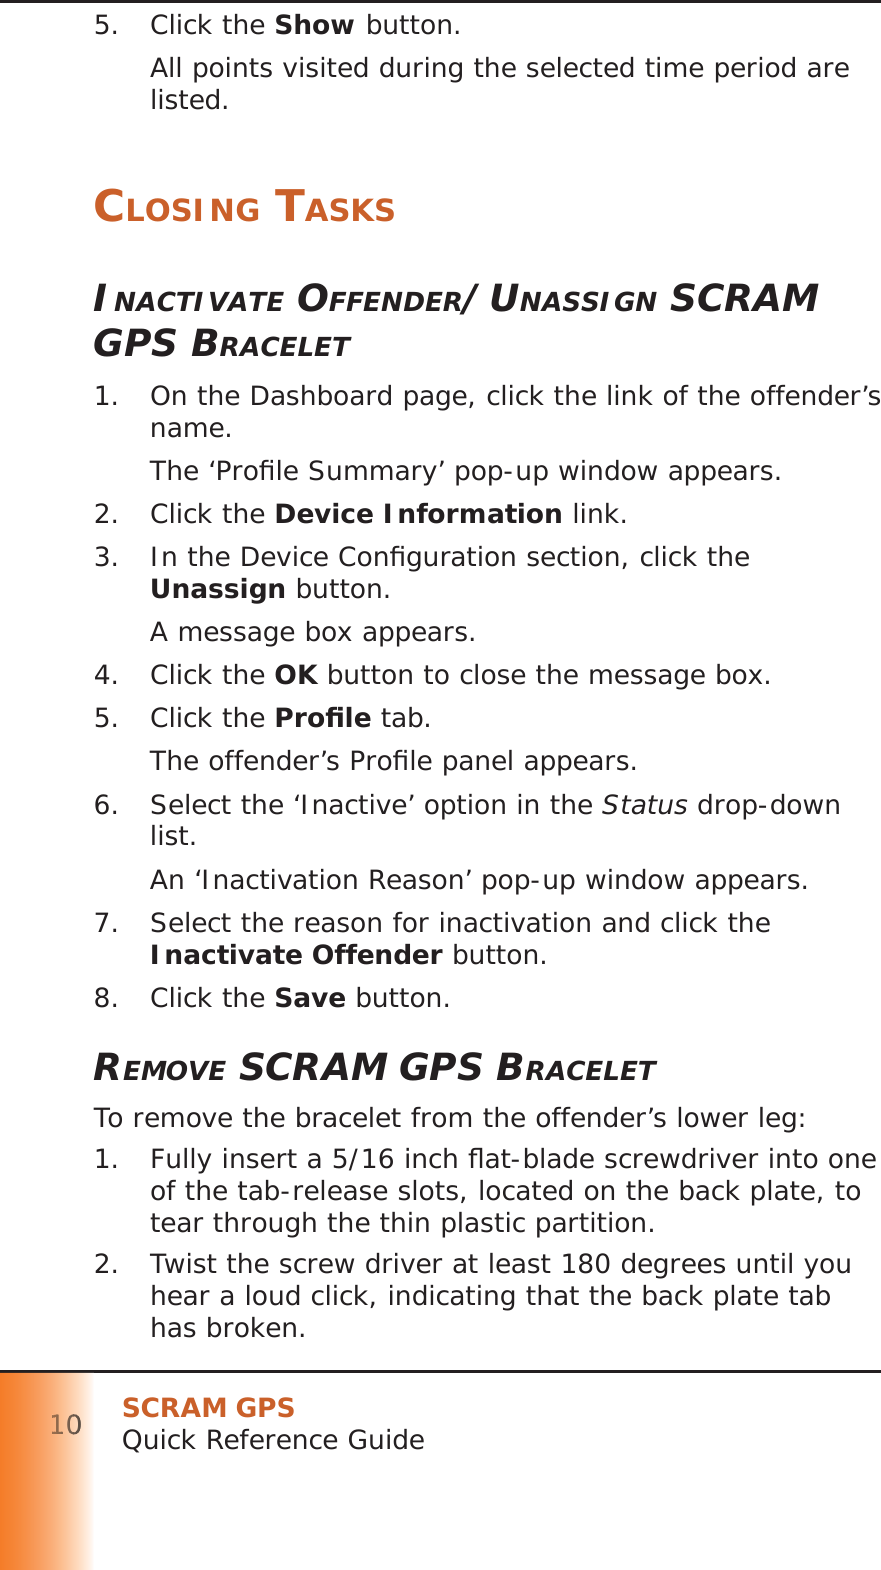 SCRAM GPSQuick Reference Guide1011111100000005. Click the Show button.All points visited during the selected time period are listed.CLOSING TASKSINACTIVATE OFFENDER/UNASSIGN SCRAM GPS BRACELET1.  On the Dashboard page, click the link of the offender’s name.The ‘Proﬁ le Summary’ pop-up window appears.2. Click the Device Information link.3.  In the Device Conﬁ guration section, click the Unassign button.A message box appears.4. Click the OK button to close the message box.5. Click the Proﬁ le tab.The offender’s Proﬁ le panel appears.6.  Select the ‘Inactive’ option in the Status drop-down list.An ‘Inactivation Reason’ pop-up window appears.7.  Select the reason for inactivation and click the Inactivate Offender button.8. Click the Save button.REMOVE SCRAM GPS BRACELETTo remove the bracelet from the offender’s lower leg:1.  Fully insert a 5/16 inch ﬂ at-blade screwdriver into one of the tab-release slots, located on the back plate, to tear through the thin plastic partition.2.  Twist the screw driver at least 180 degrees until you hear a loud click, indicating that the back plate tab has broken.